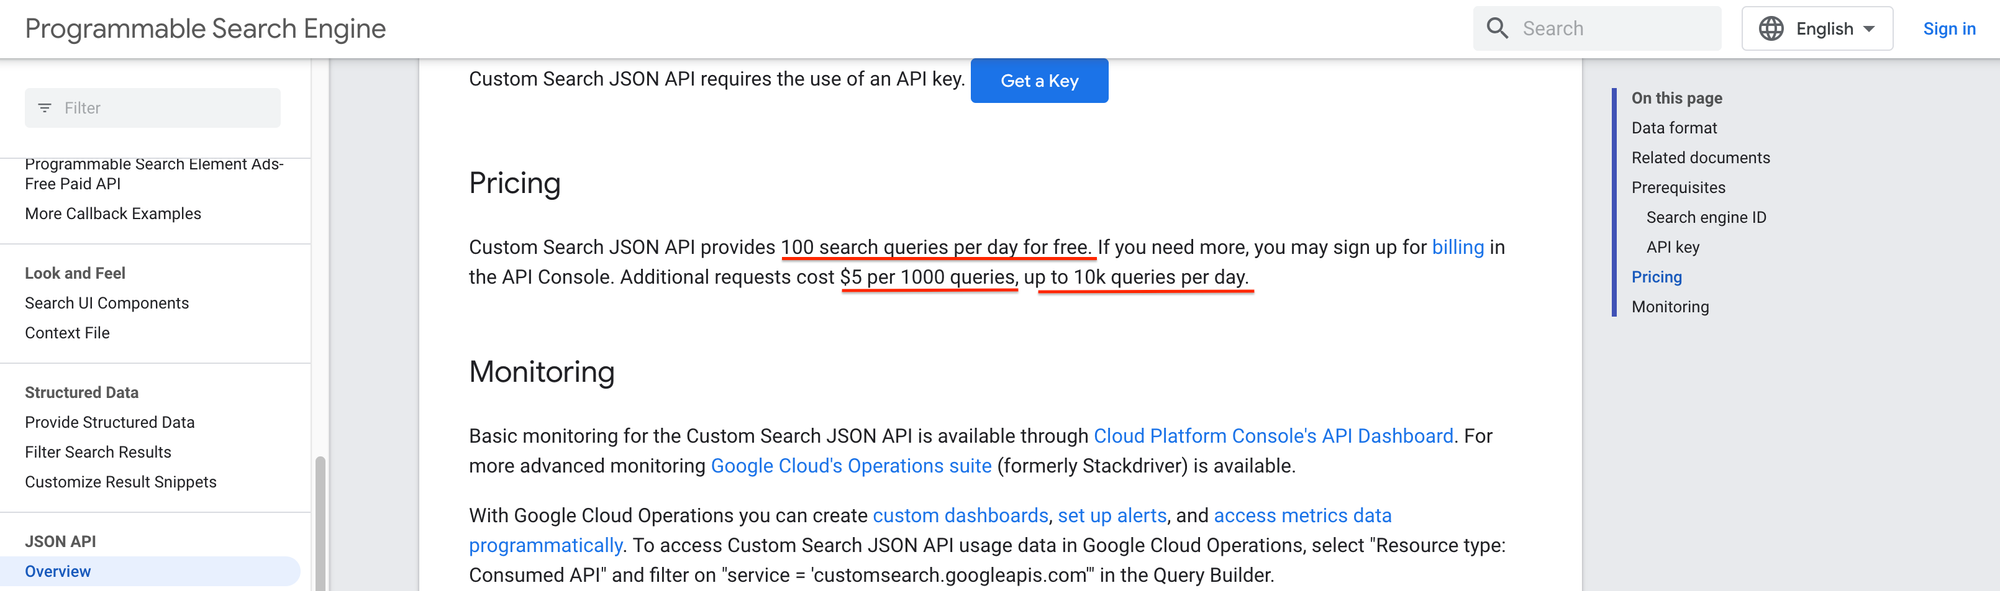 How to set up Google Custom Search API as an image API? Find out below. 